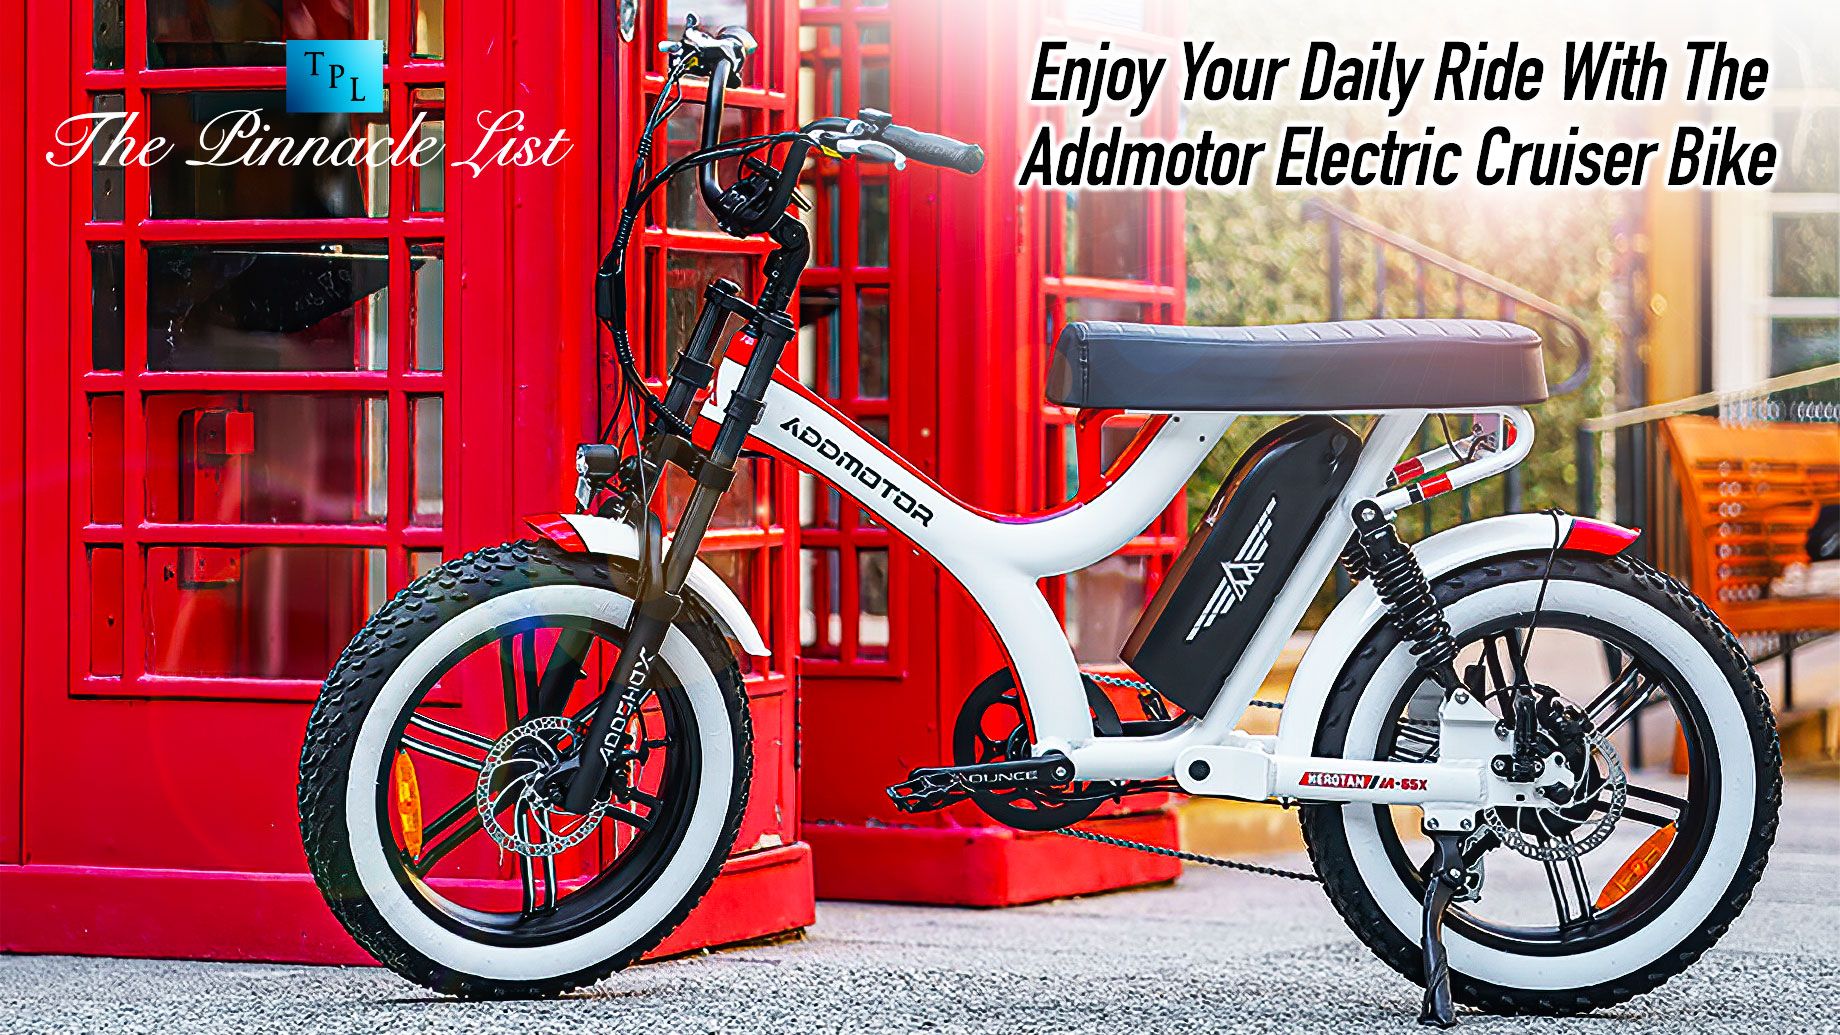 Enjoy Your Daily Ride With The Addmotor Electric Cruiser Bike